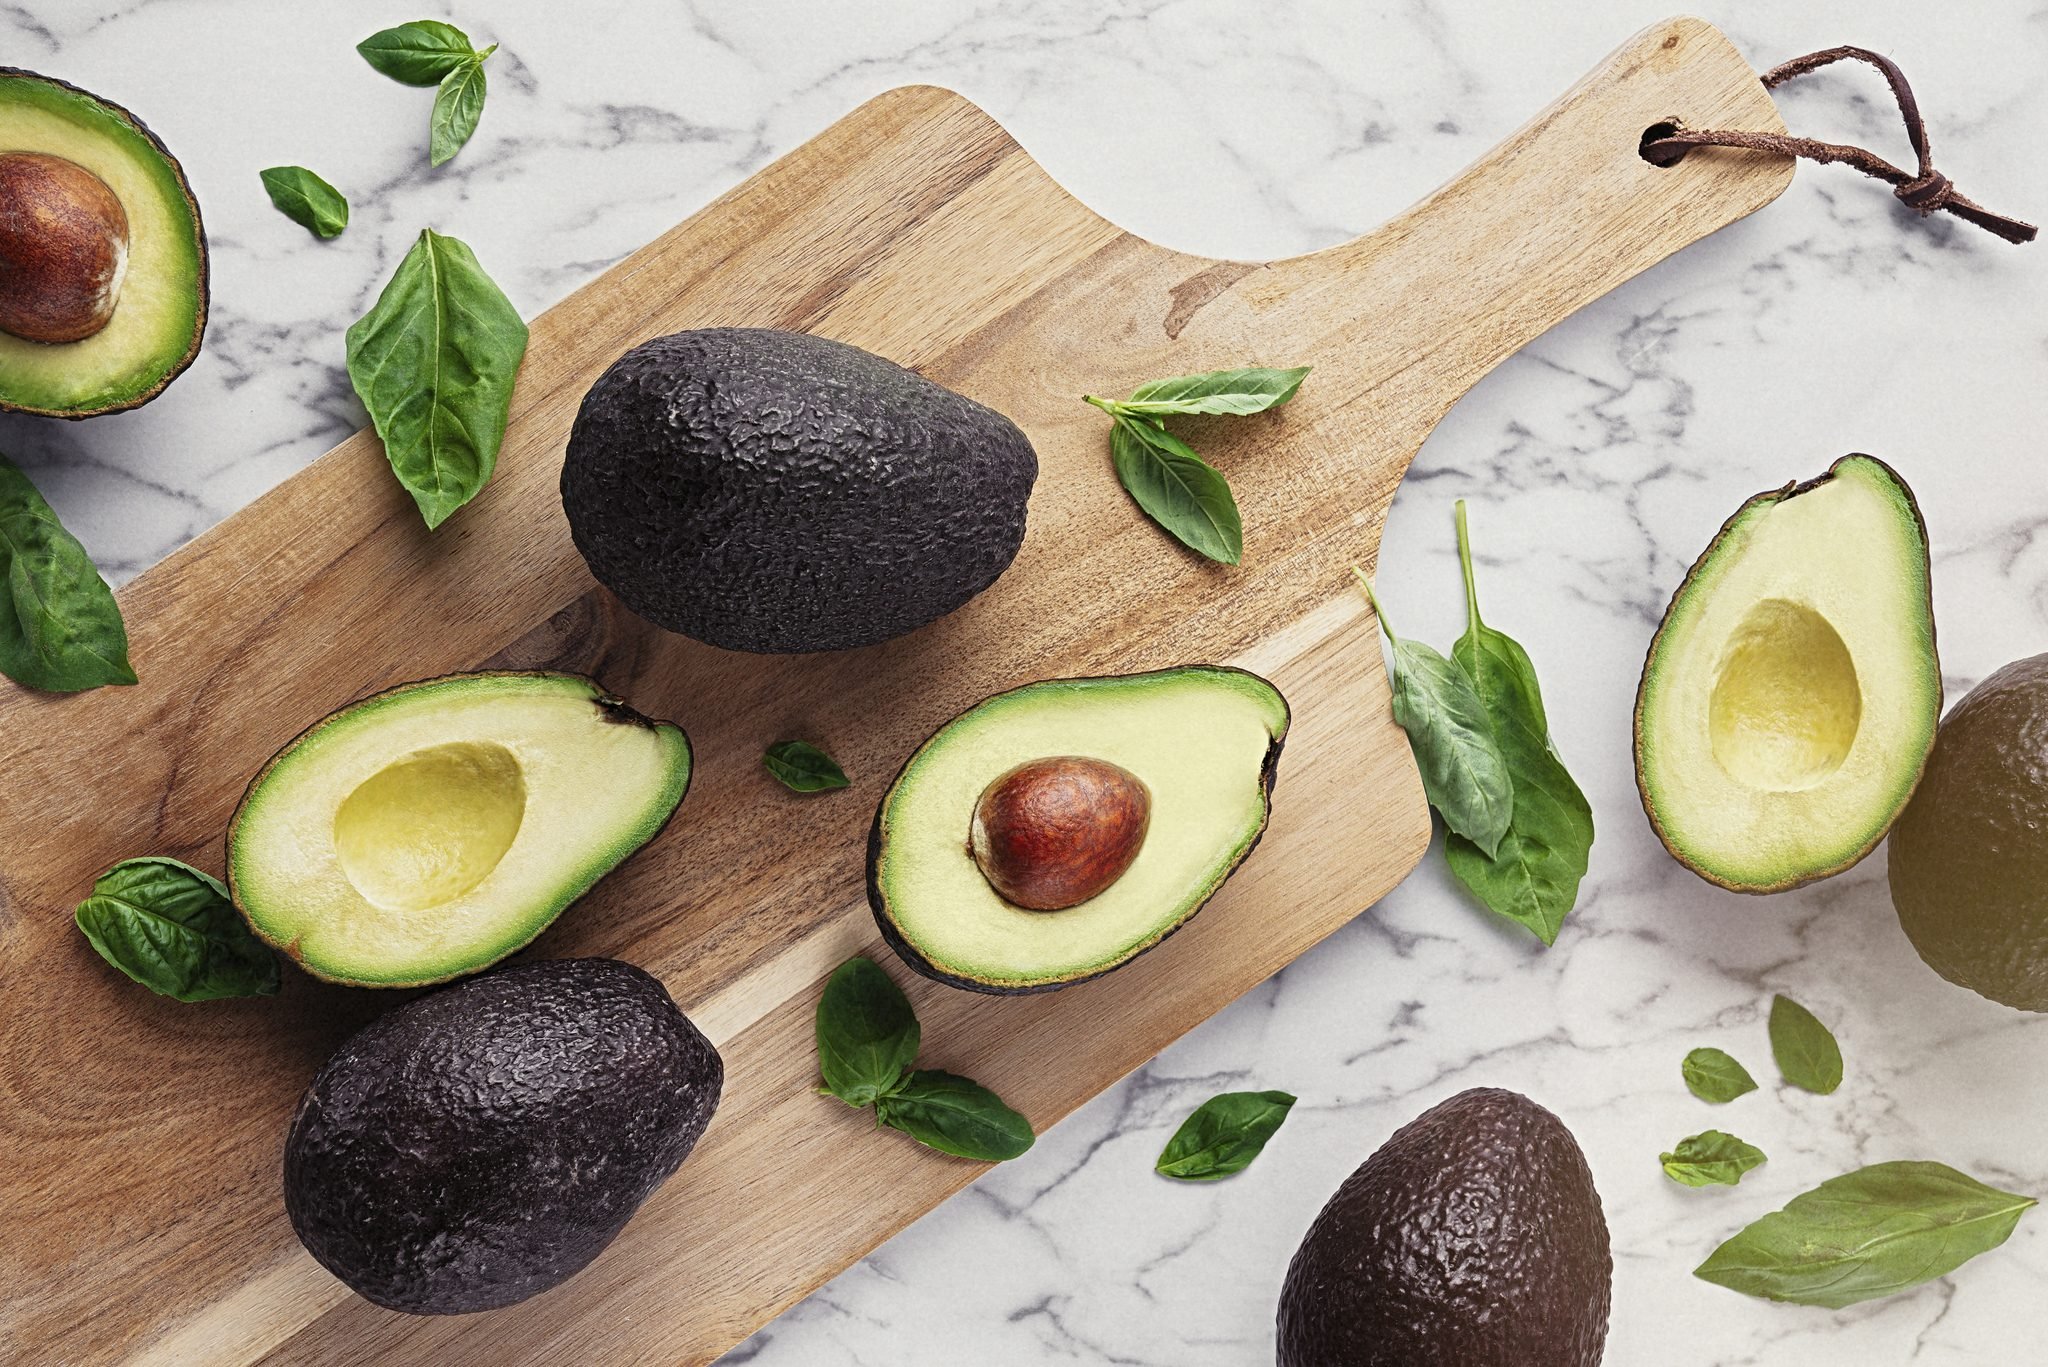 How to Cut an Avocado  There's an Easier & Better Way!